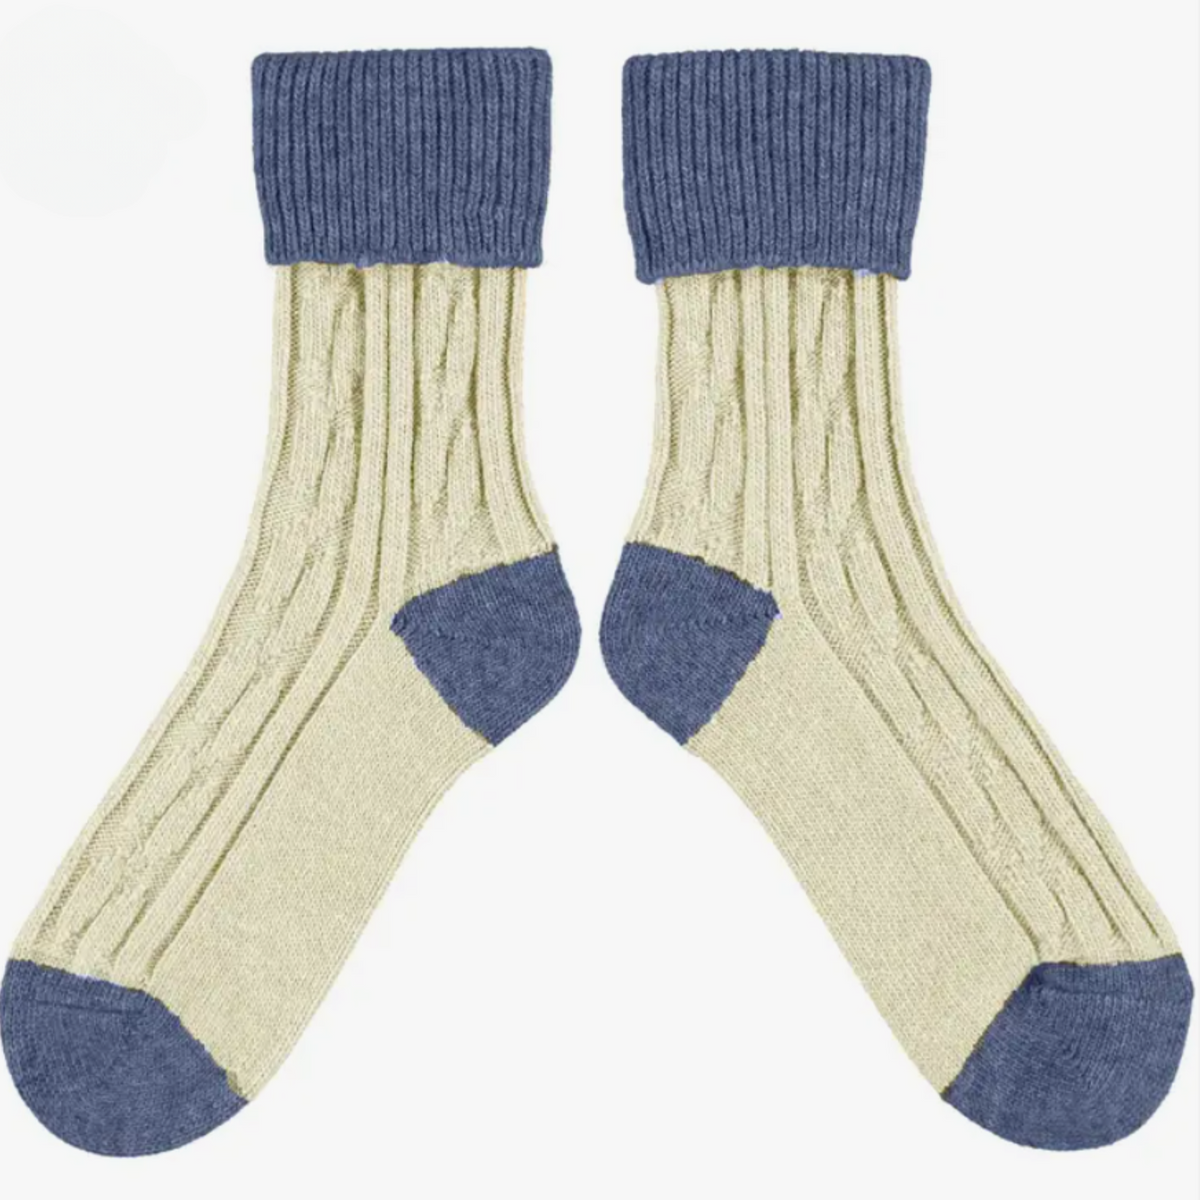 Catherine Tough Slouch Cashmere Blend women&#39;s and men&#39;s crew socks featuring cable knit socks with denim colored cuff, heel and toes and oatmeal colored body. Socks shown on display. 